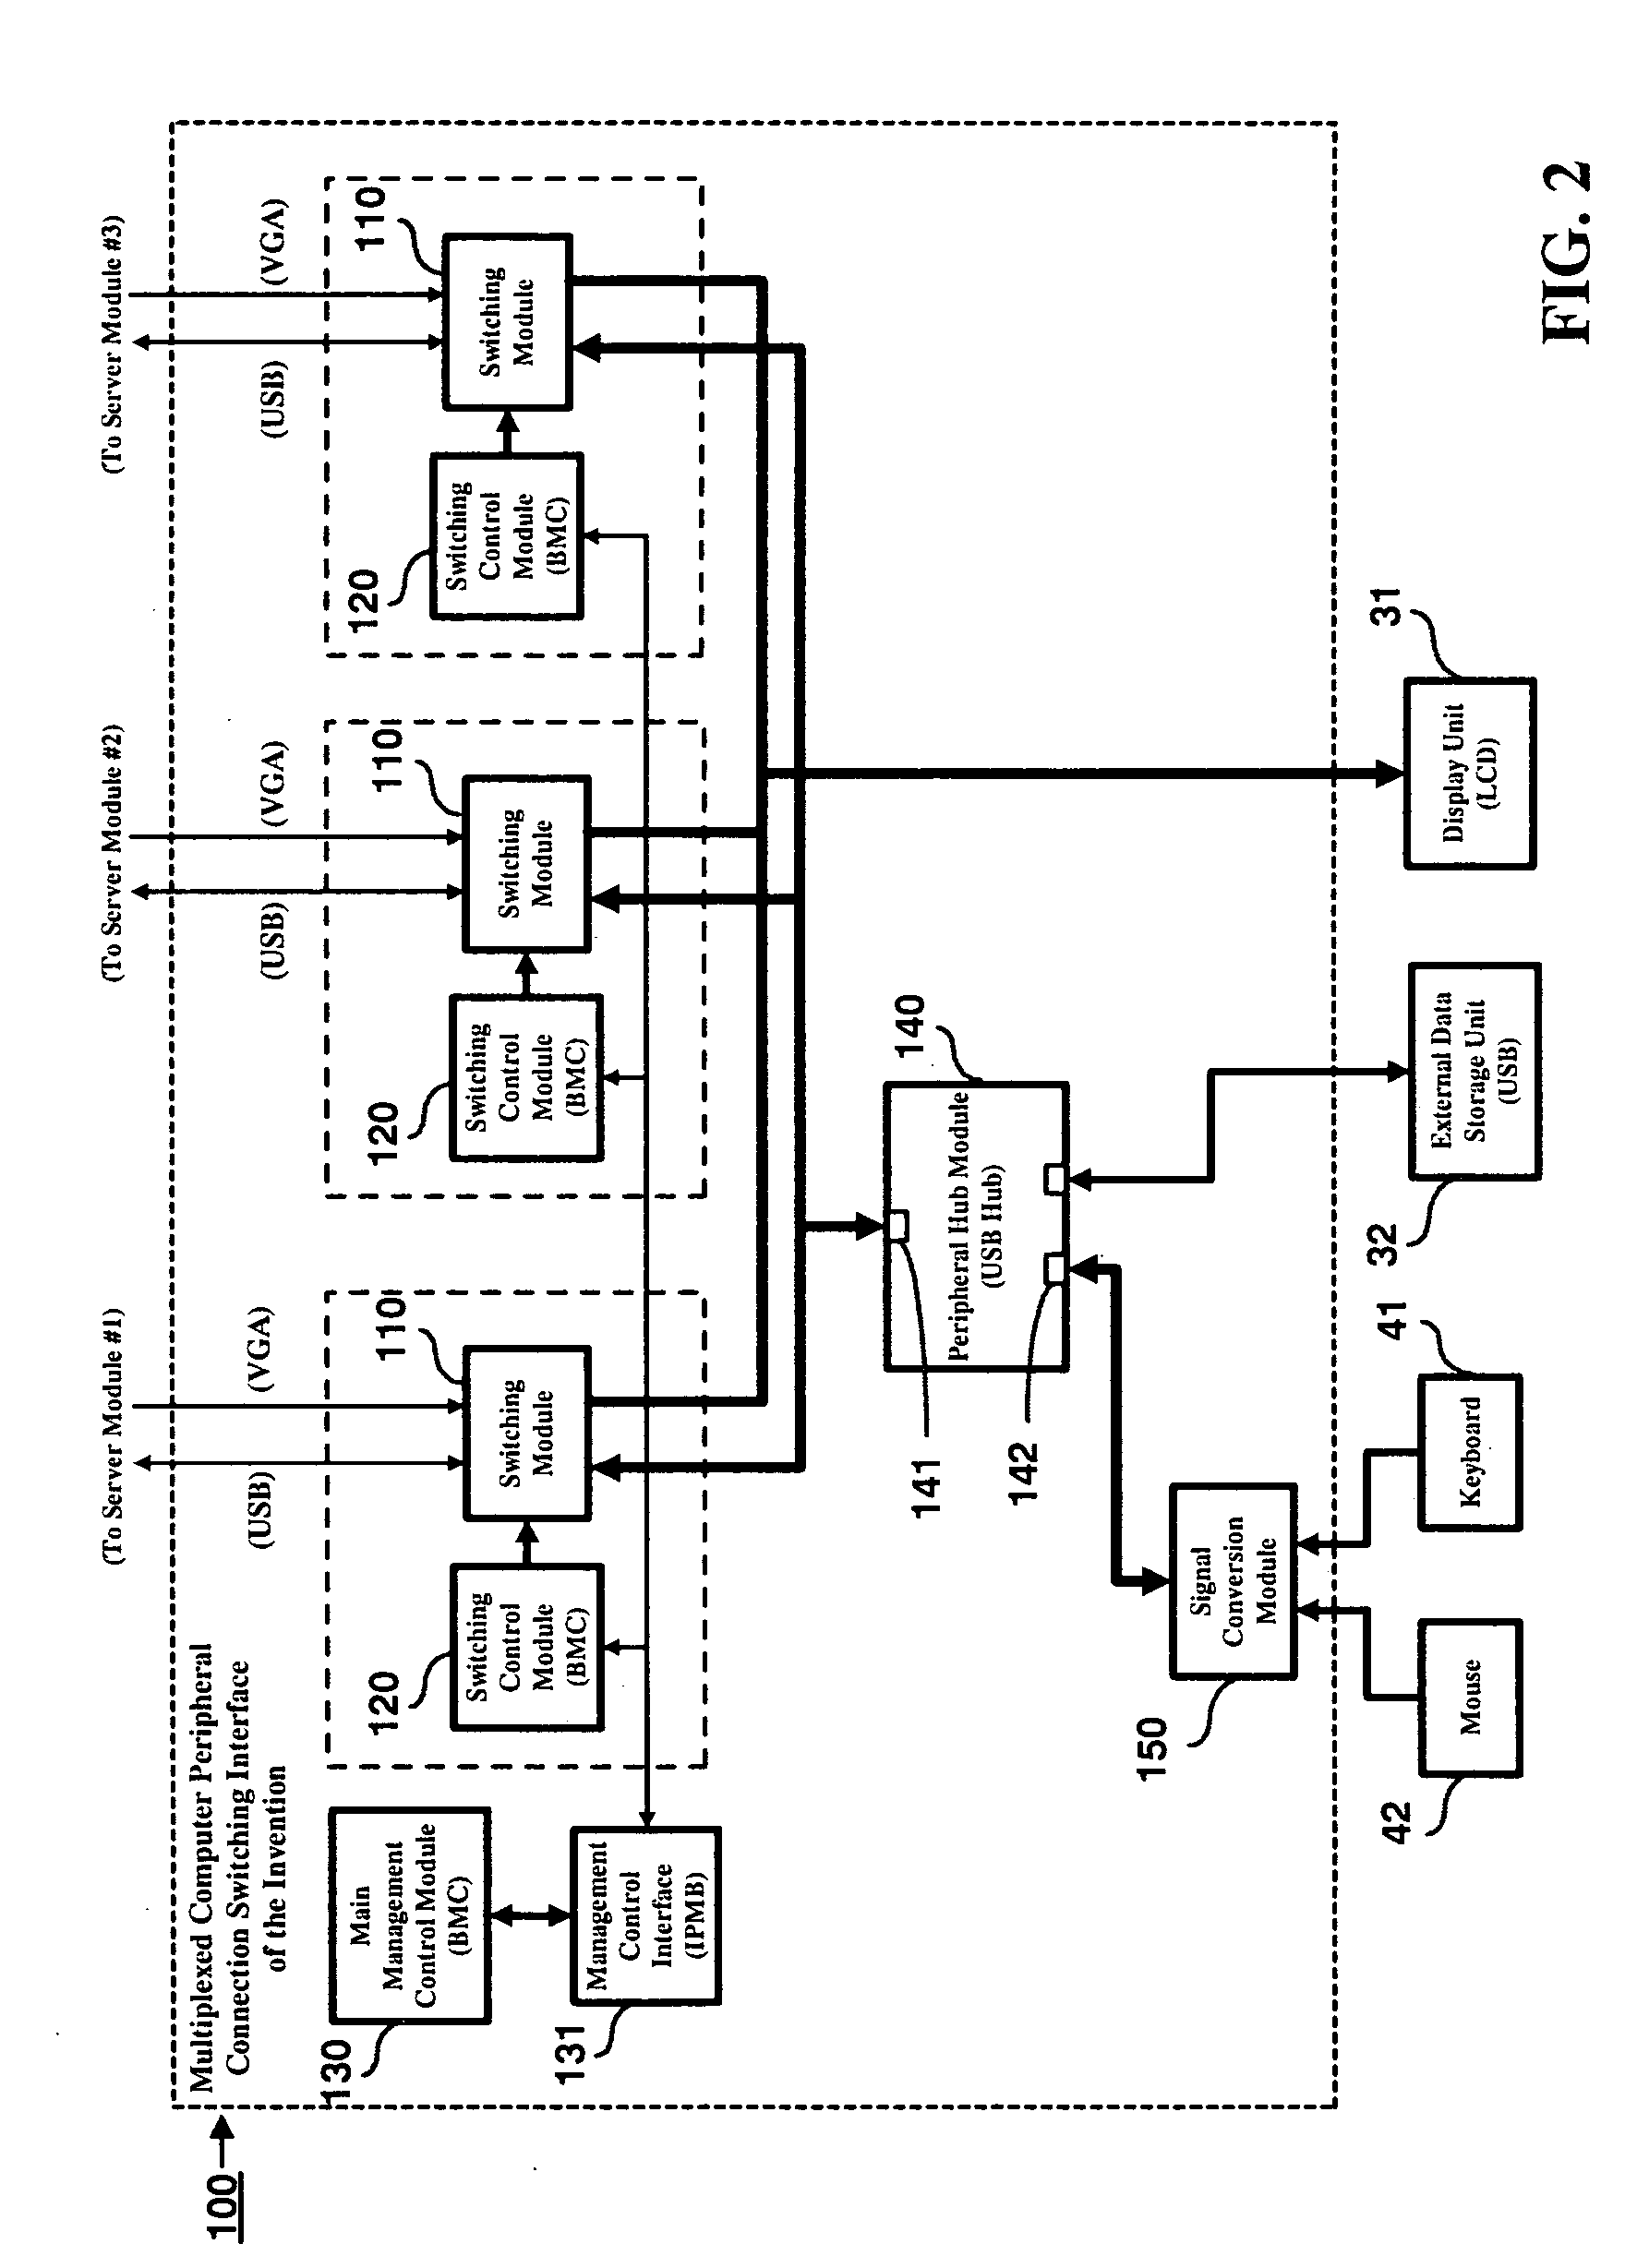 Multiplexed computer peripheral connection switching interface